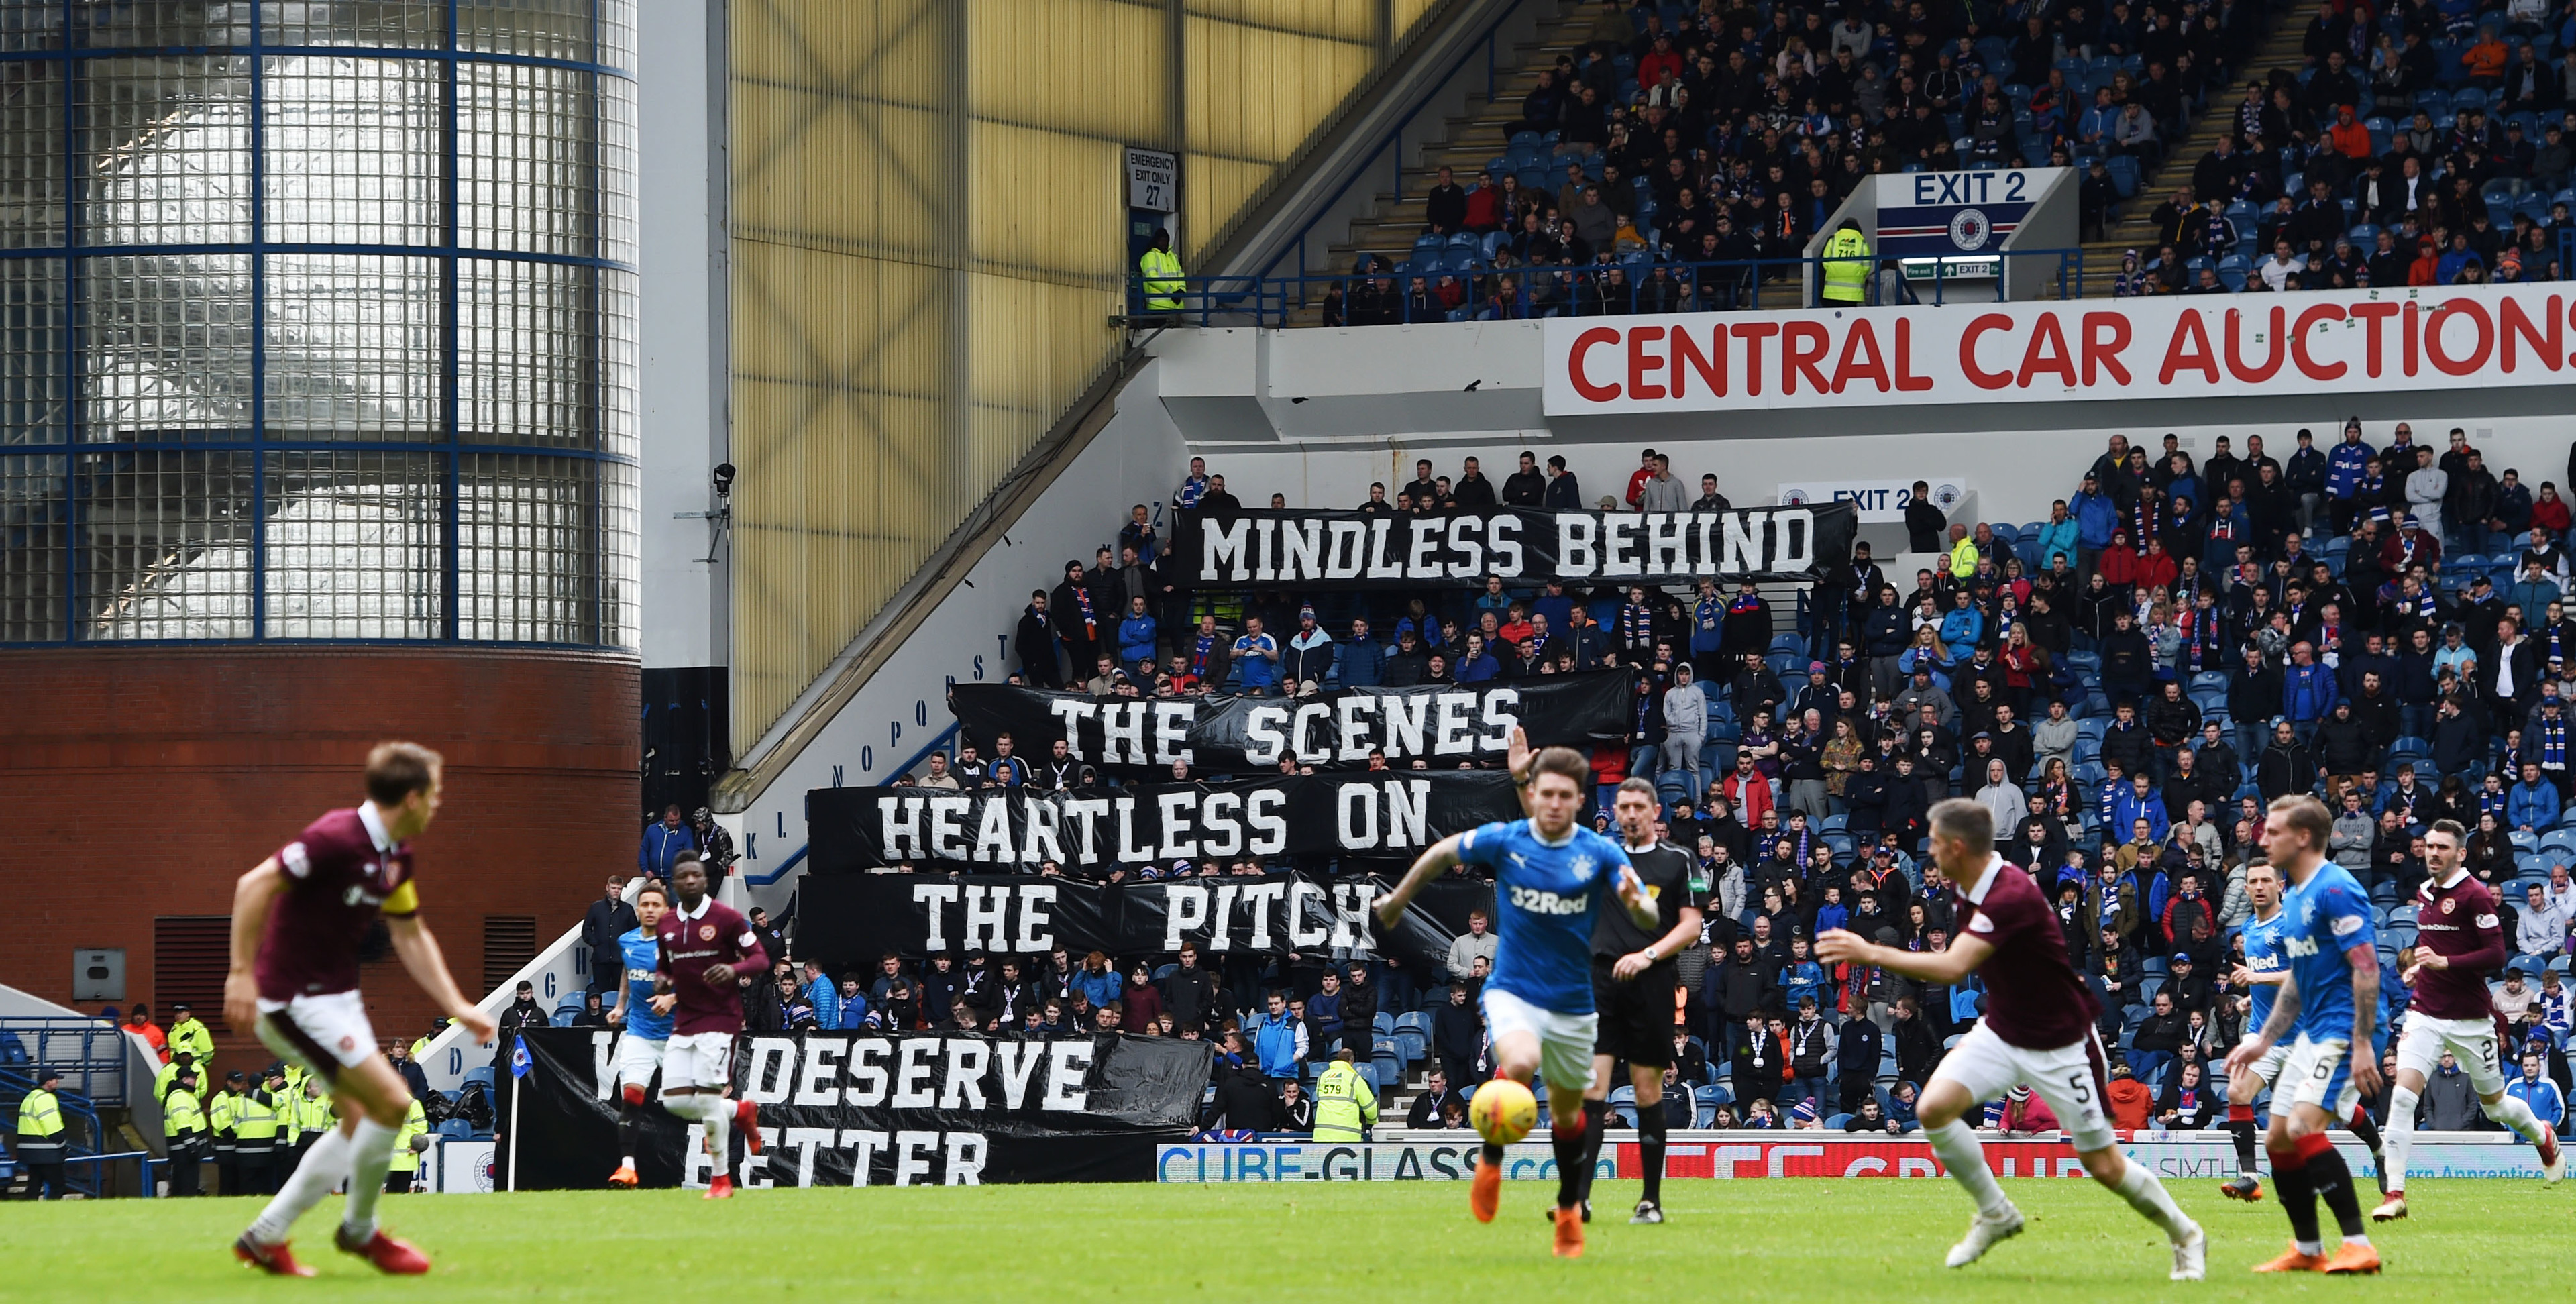 Rangers fans display a banner at the match against Hearts (SNS Group / Craig Foy)